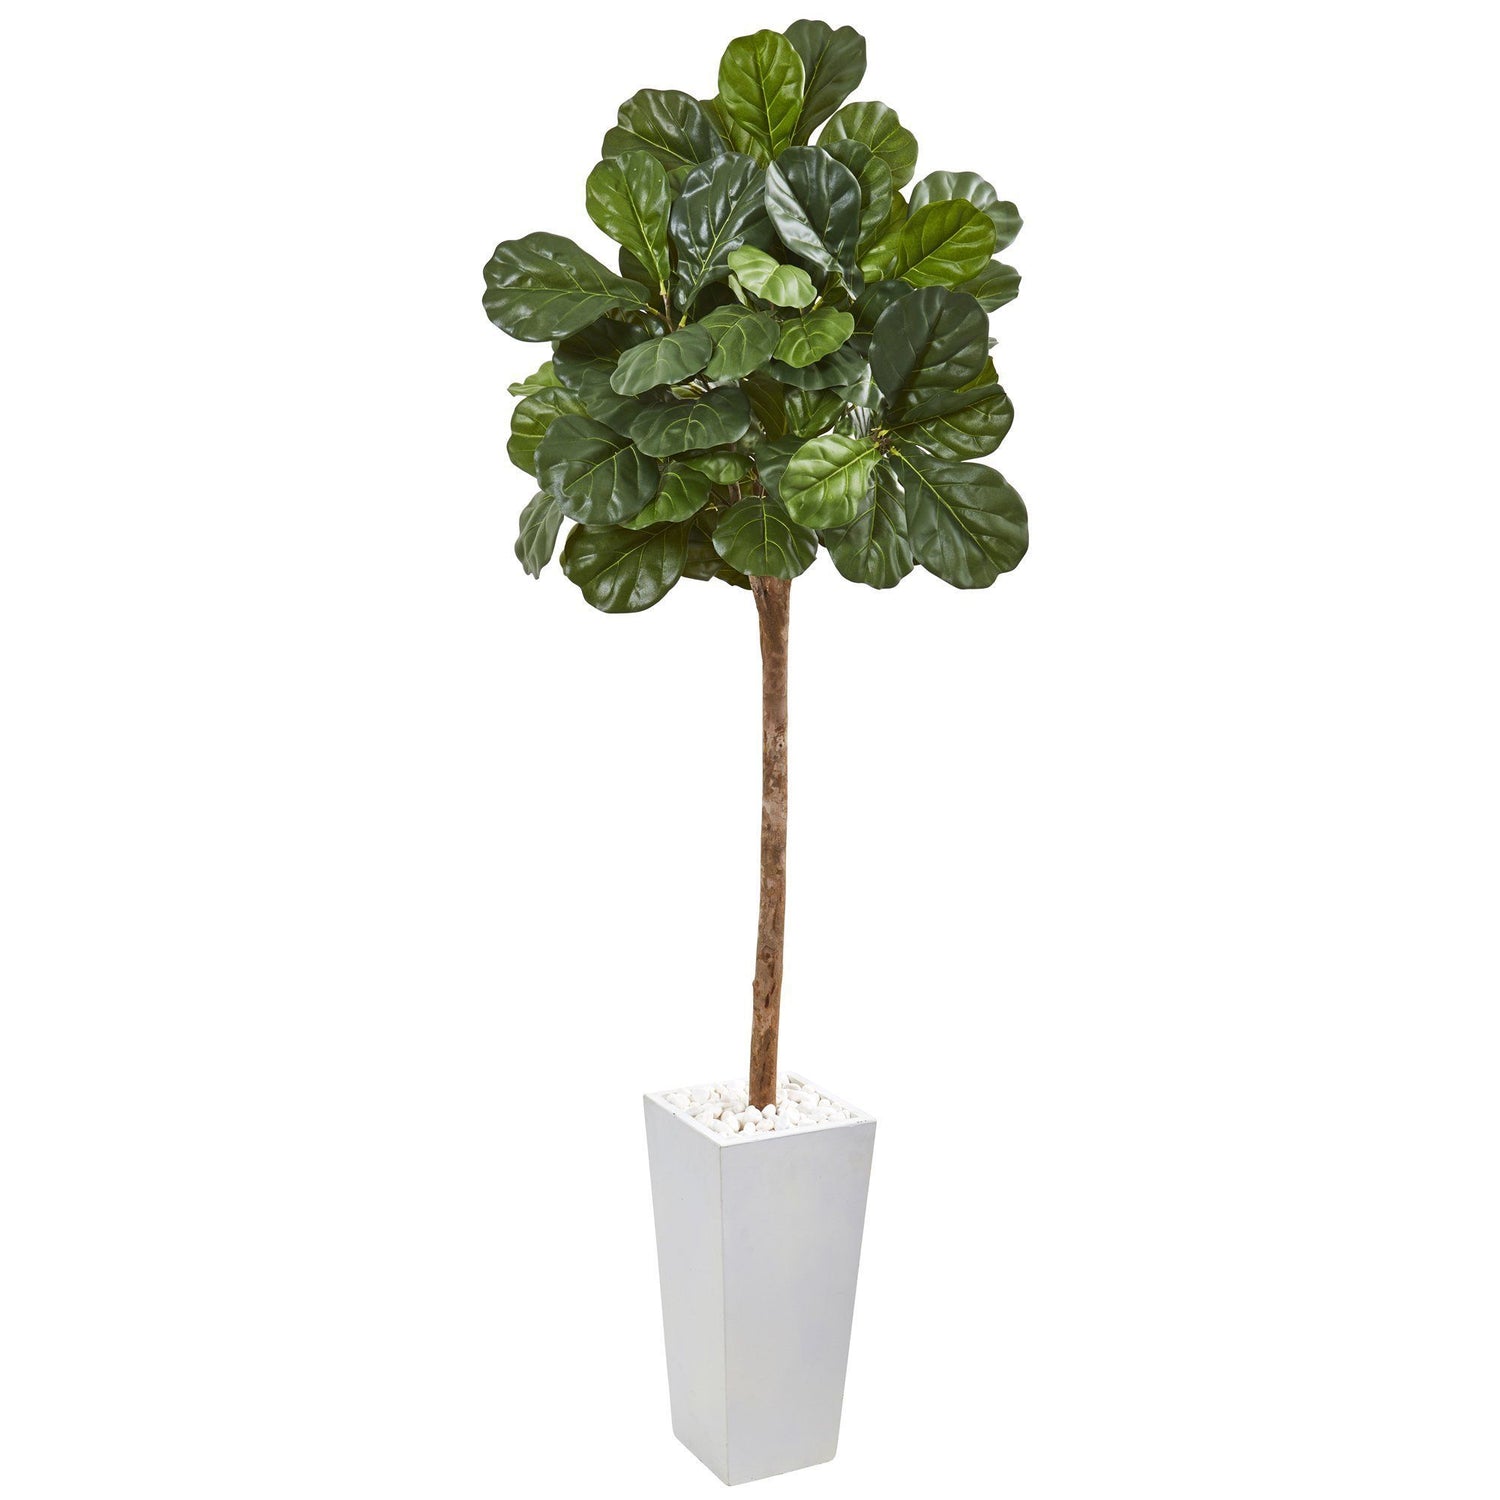 75” Fiddle Leaf Fig Artificial Tree in White Planter